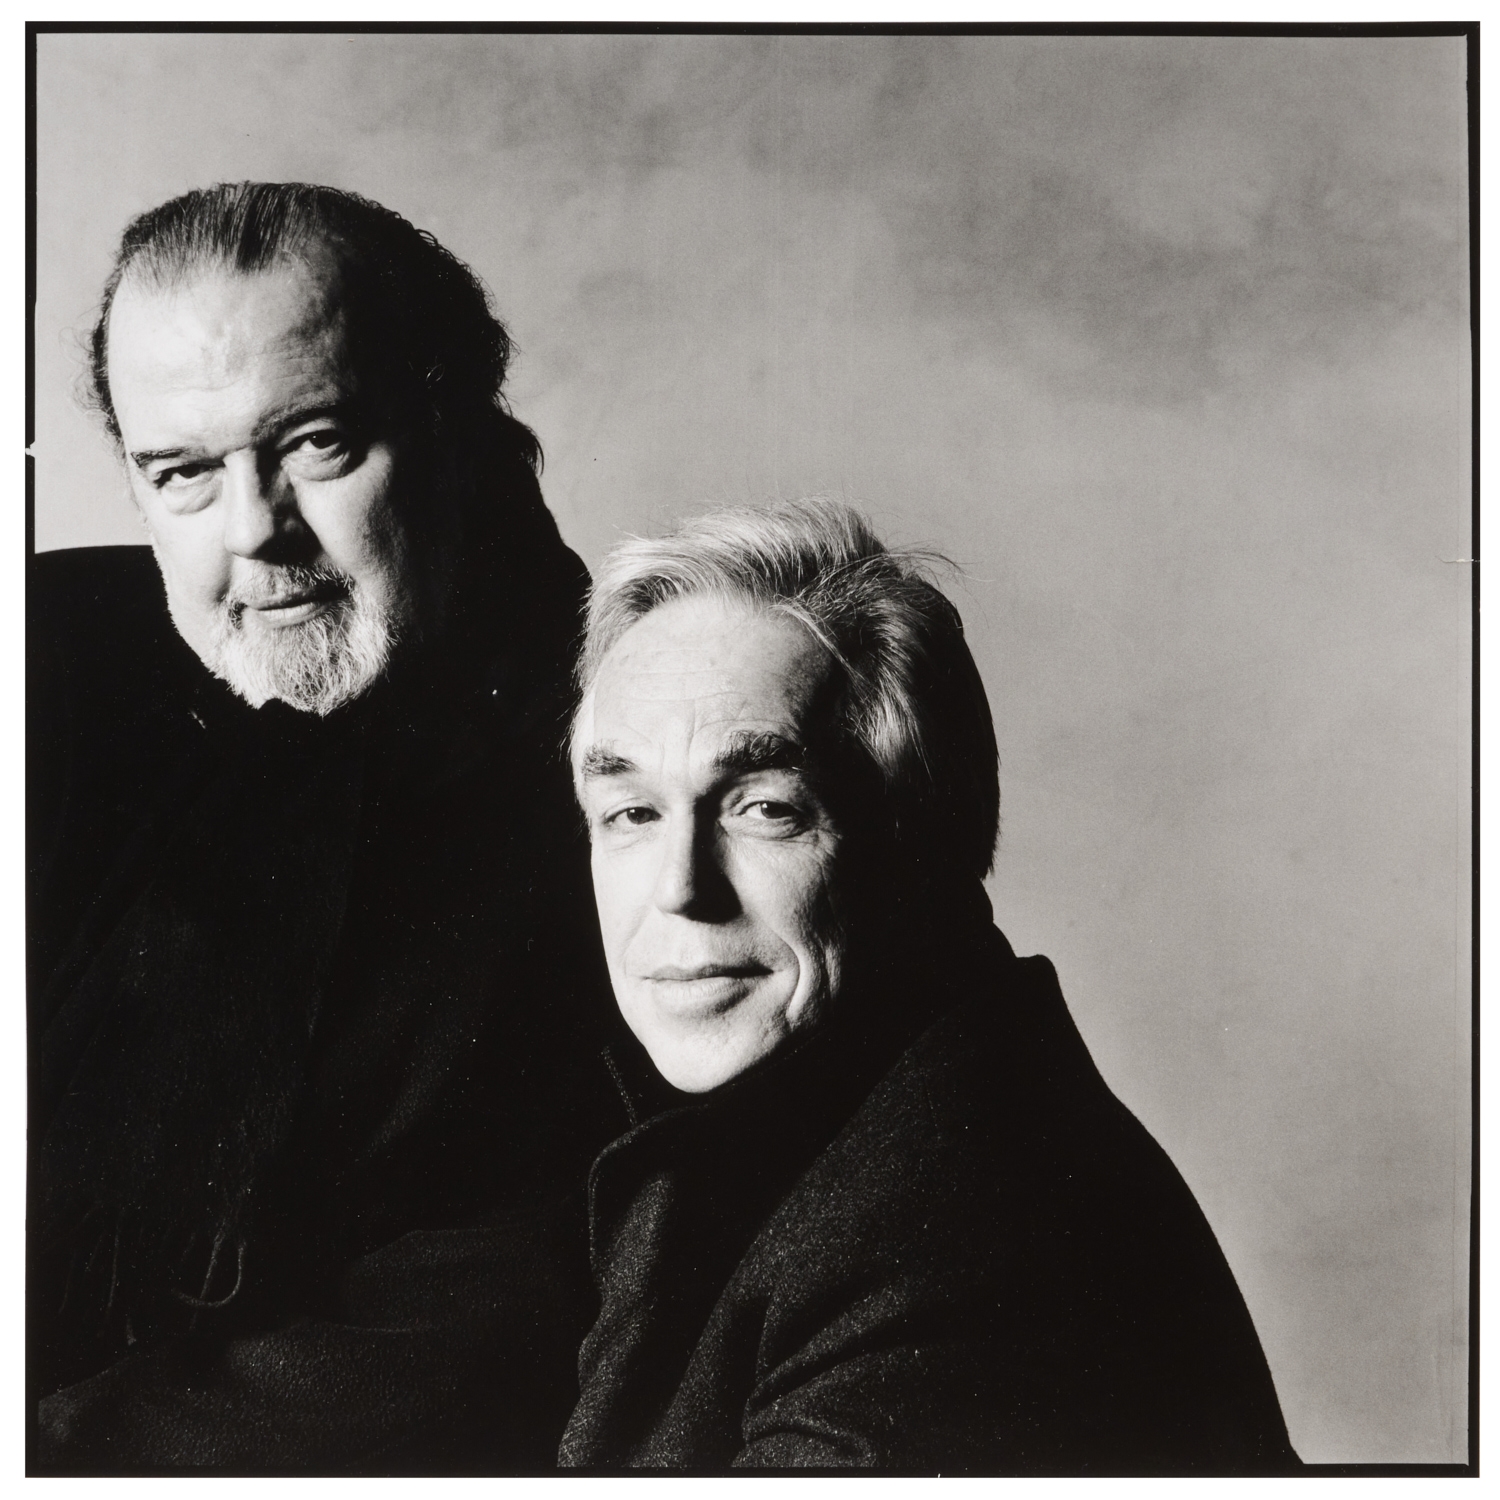 Portrait of Orson Welles and Peter Bogdanovich by Irving Penn